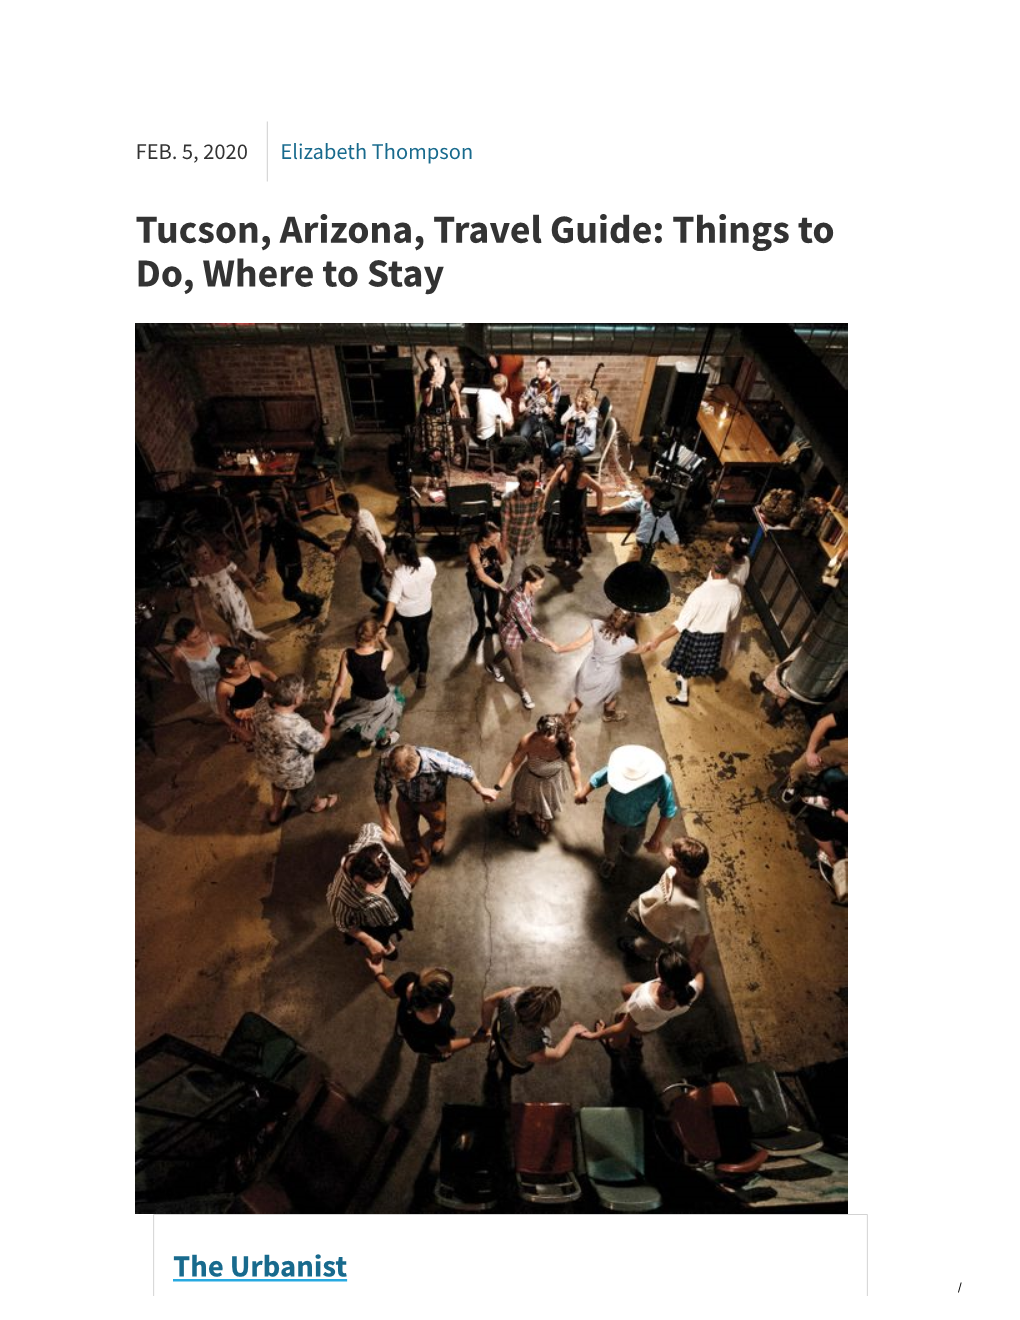 Tucson, Arizona, Travel Guide: Things to Do, Where to Stay